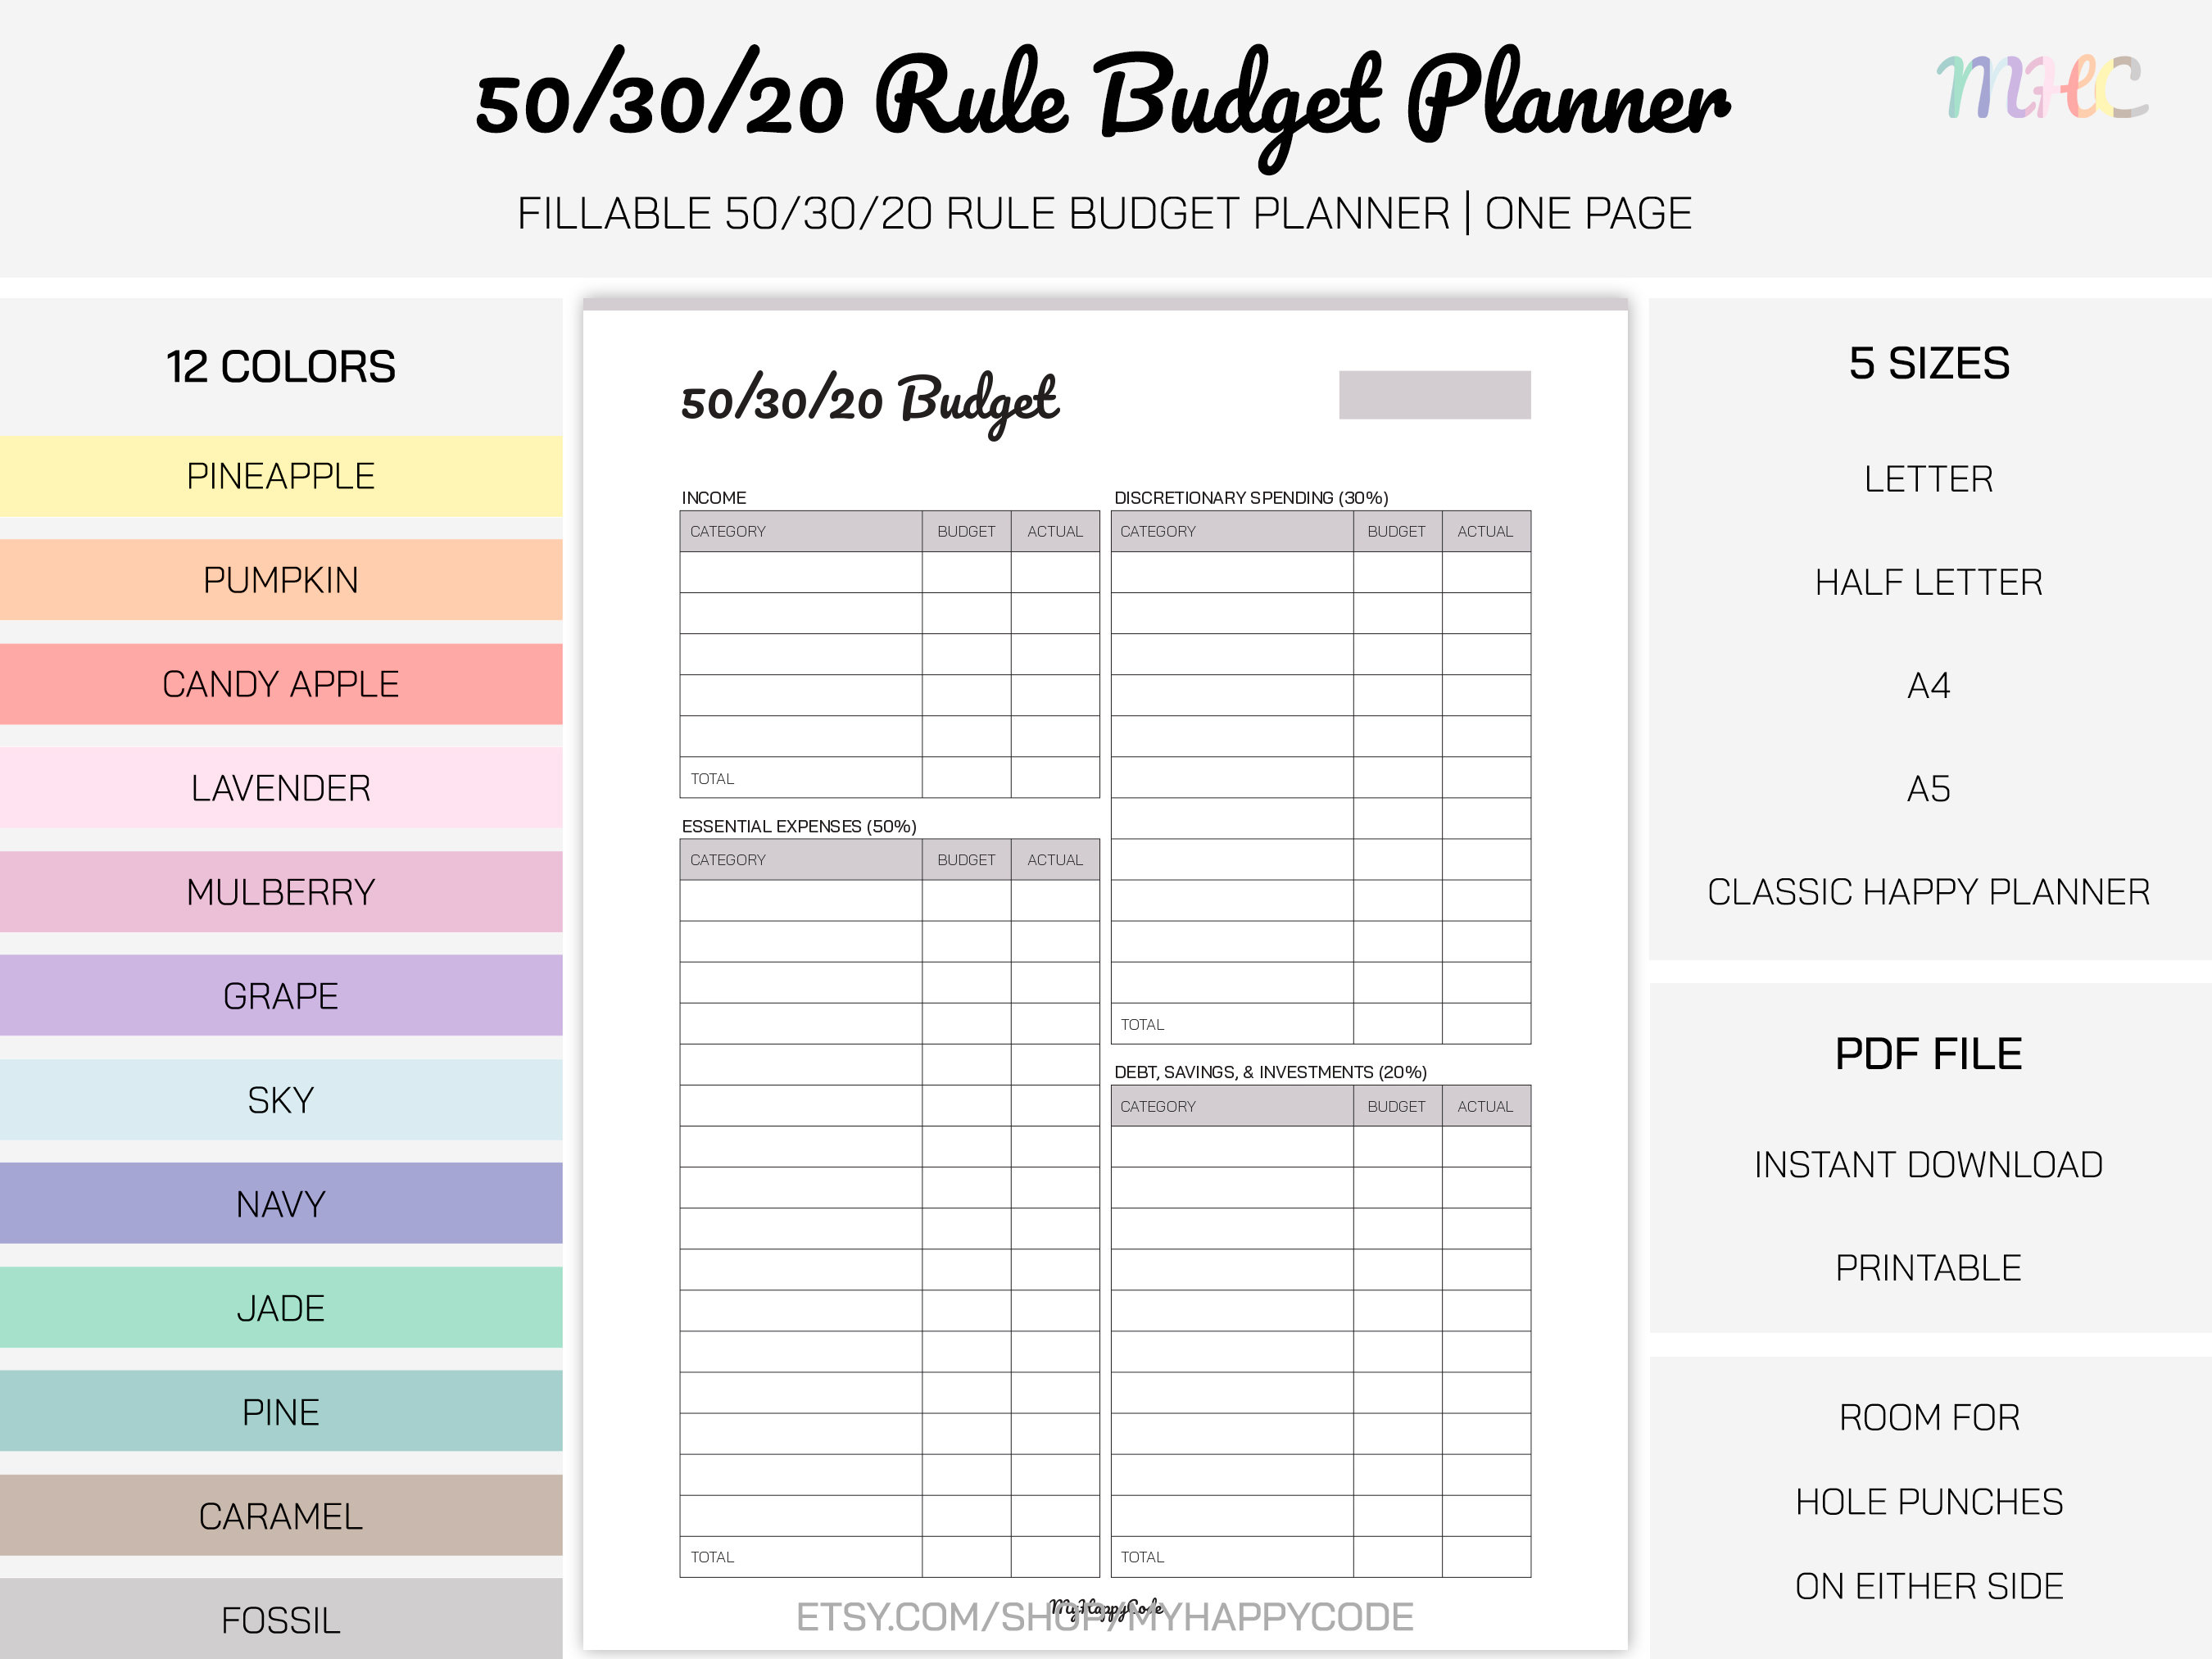 Fillable 50/30/20 Rule Budget Planner Printable, 50/30/20 Budget